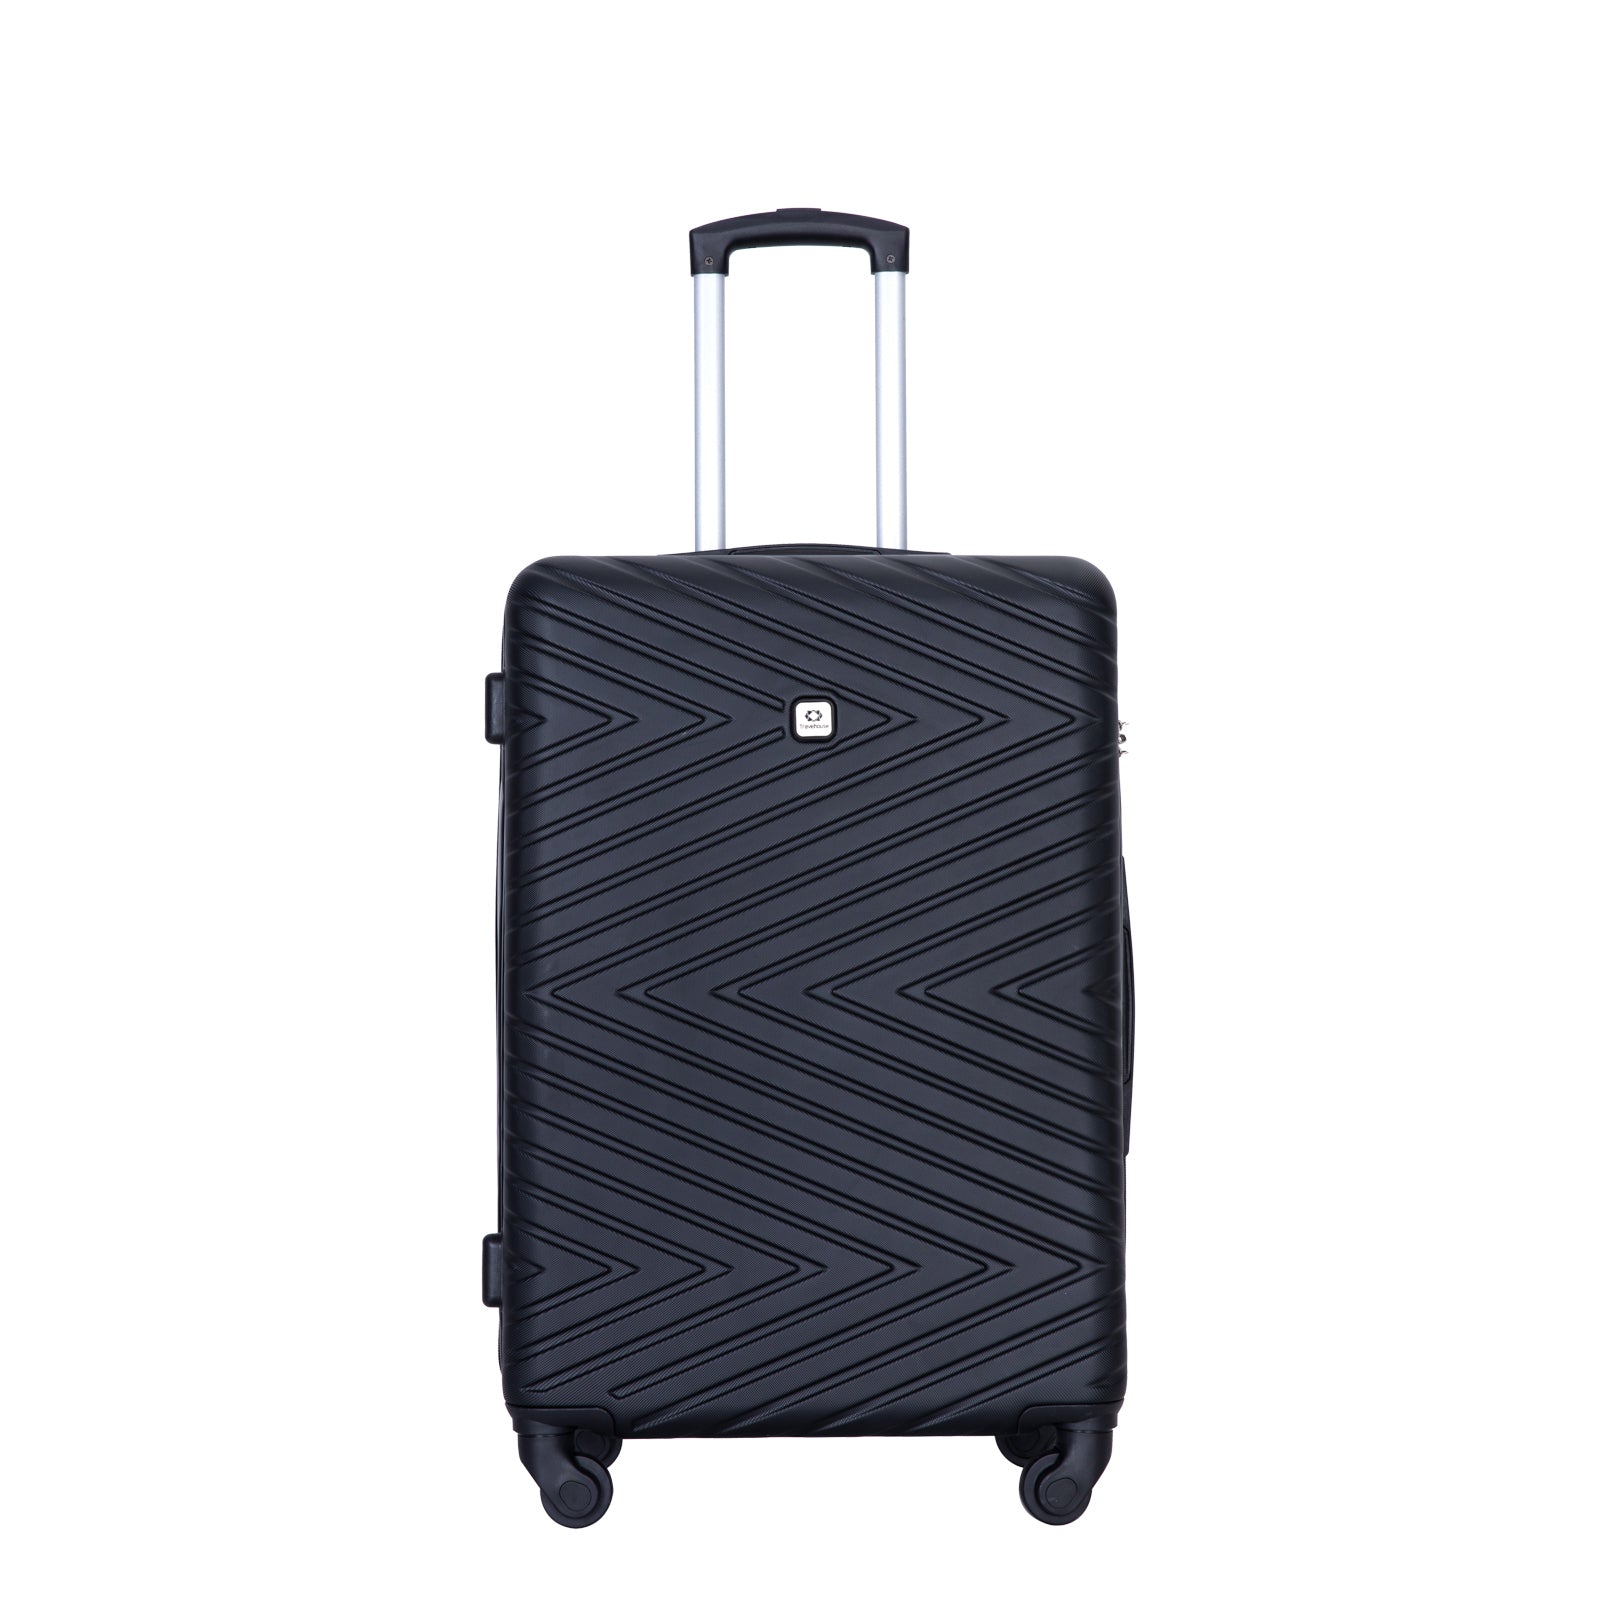 luggage 4 piece ABS lightweight suitcase with rotating black-abs